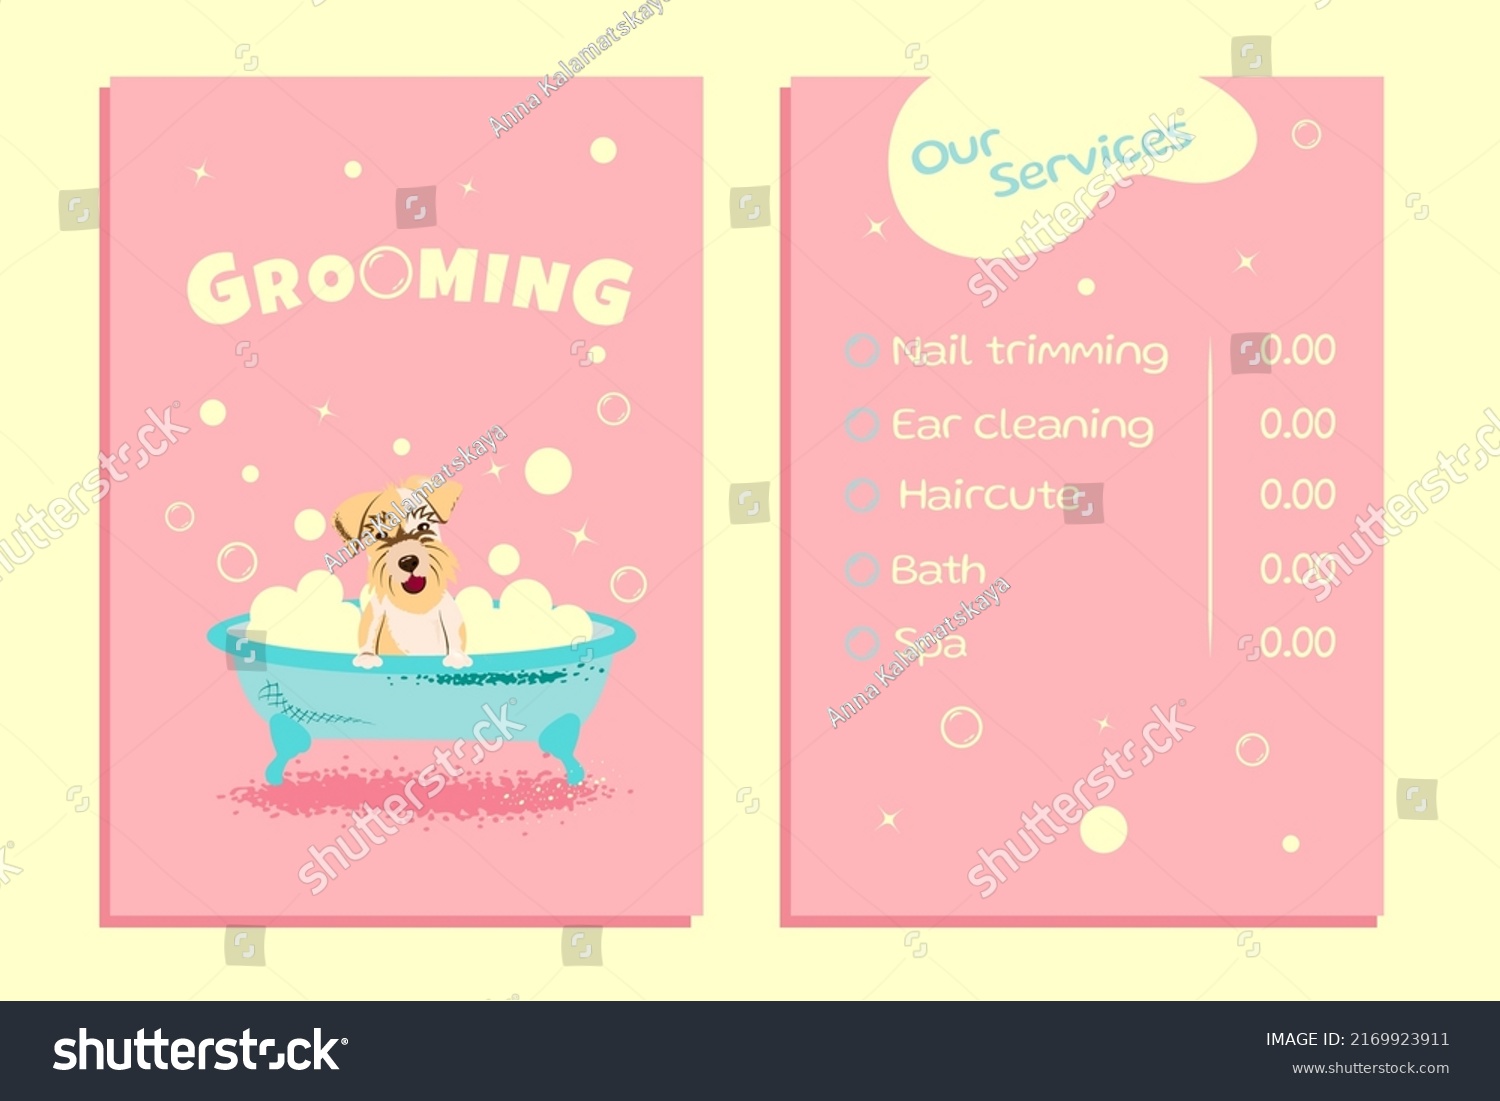 SVG of Concept of a grooming salon. Cartoon dog sitting in a bubble bath. Vector Illustration business card pricelist and special offer for pet grooming salon with dog and bubbles. Printable template a4 svg